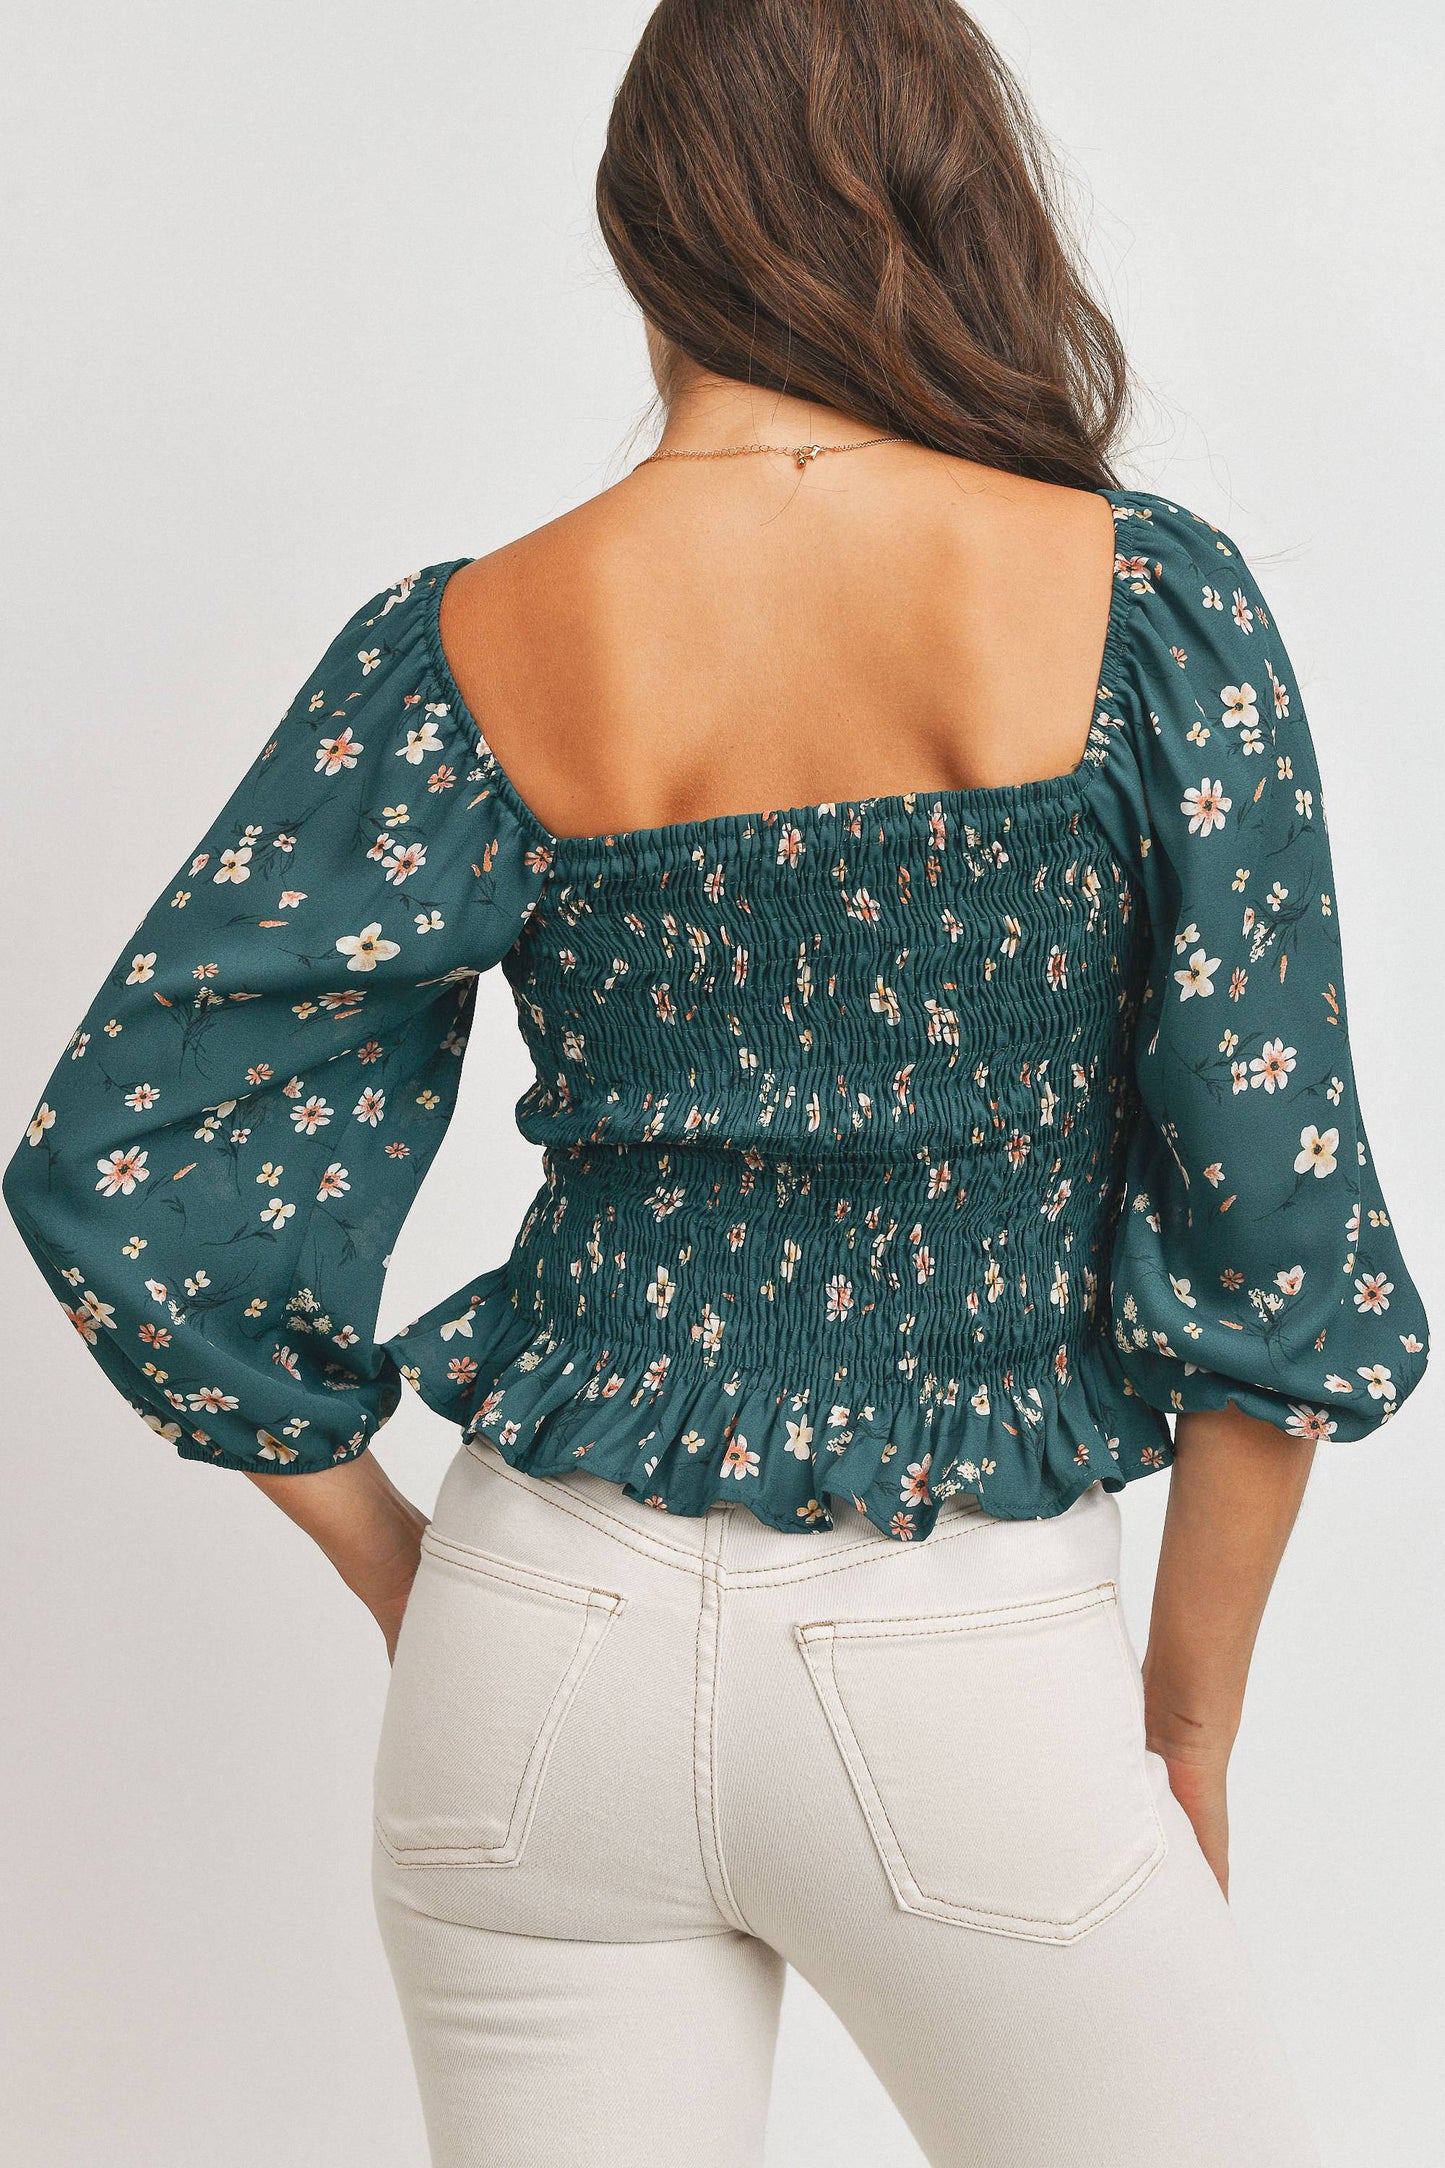 The Cianna Emerald Smocked Floral Print Top